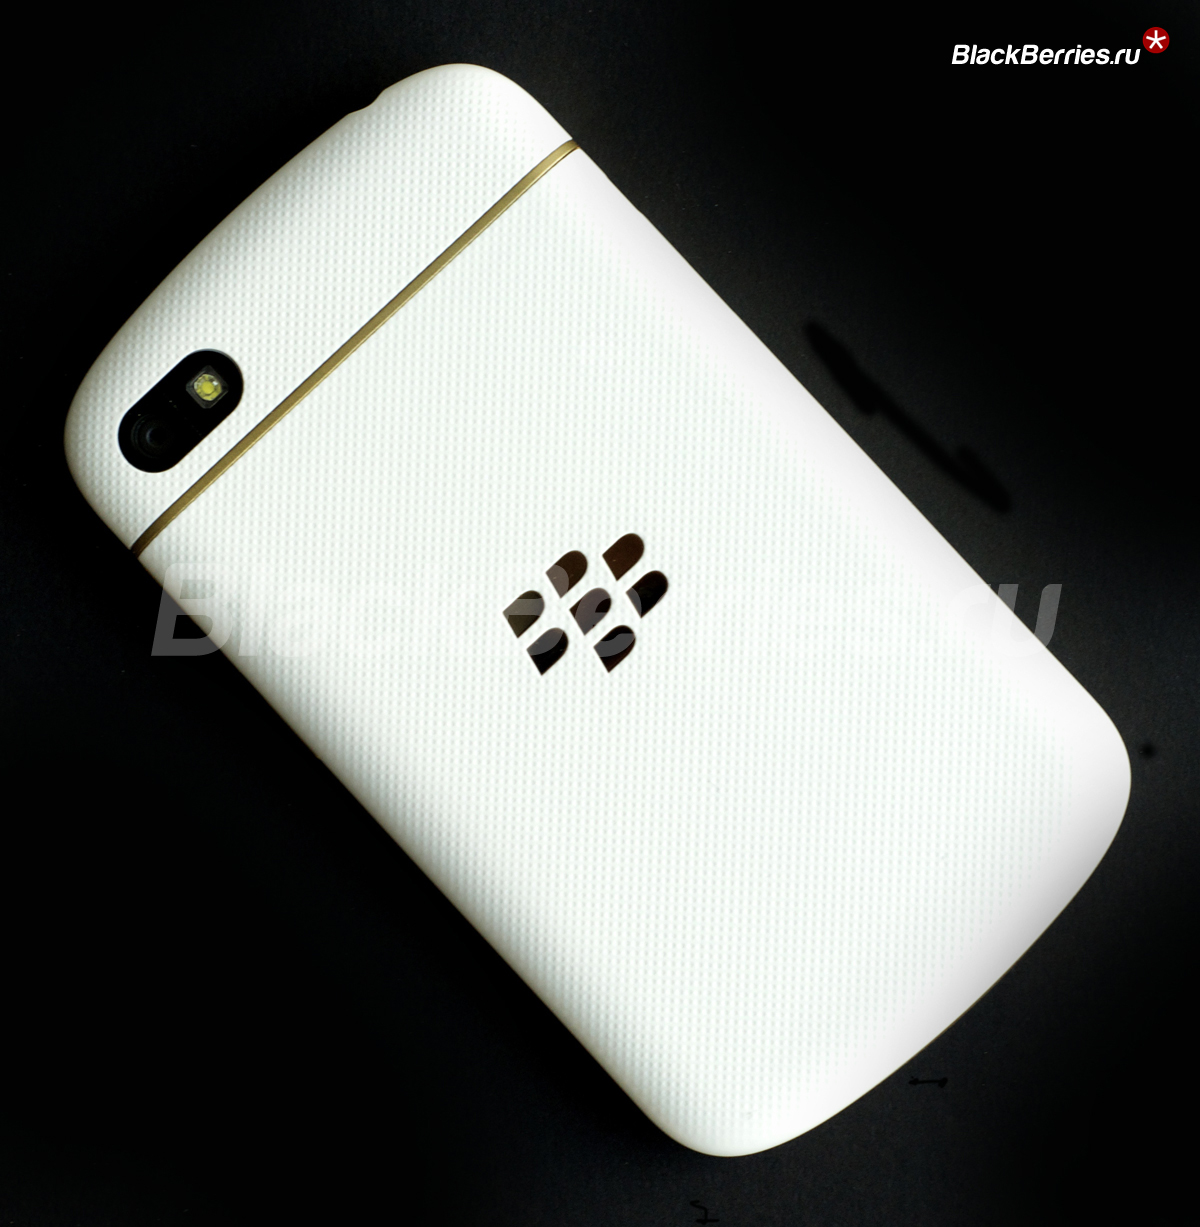 BlackBerry-Q10-Special-Edition-99